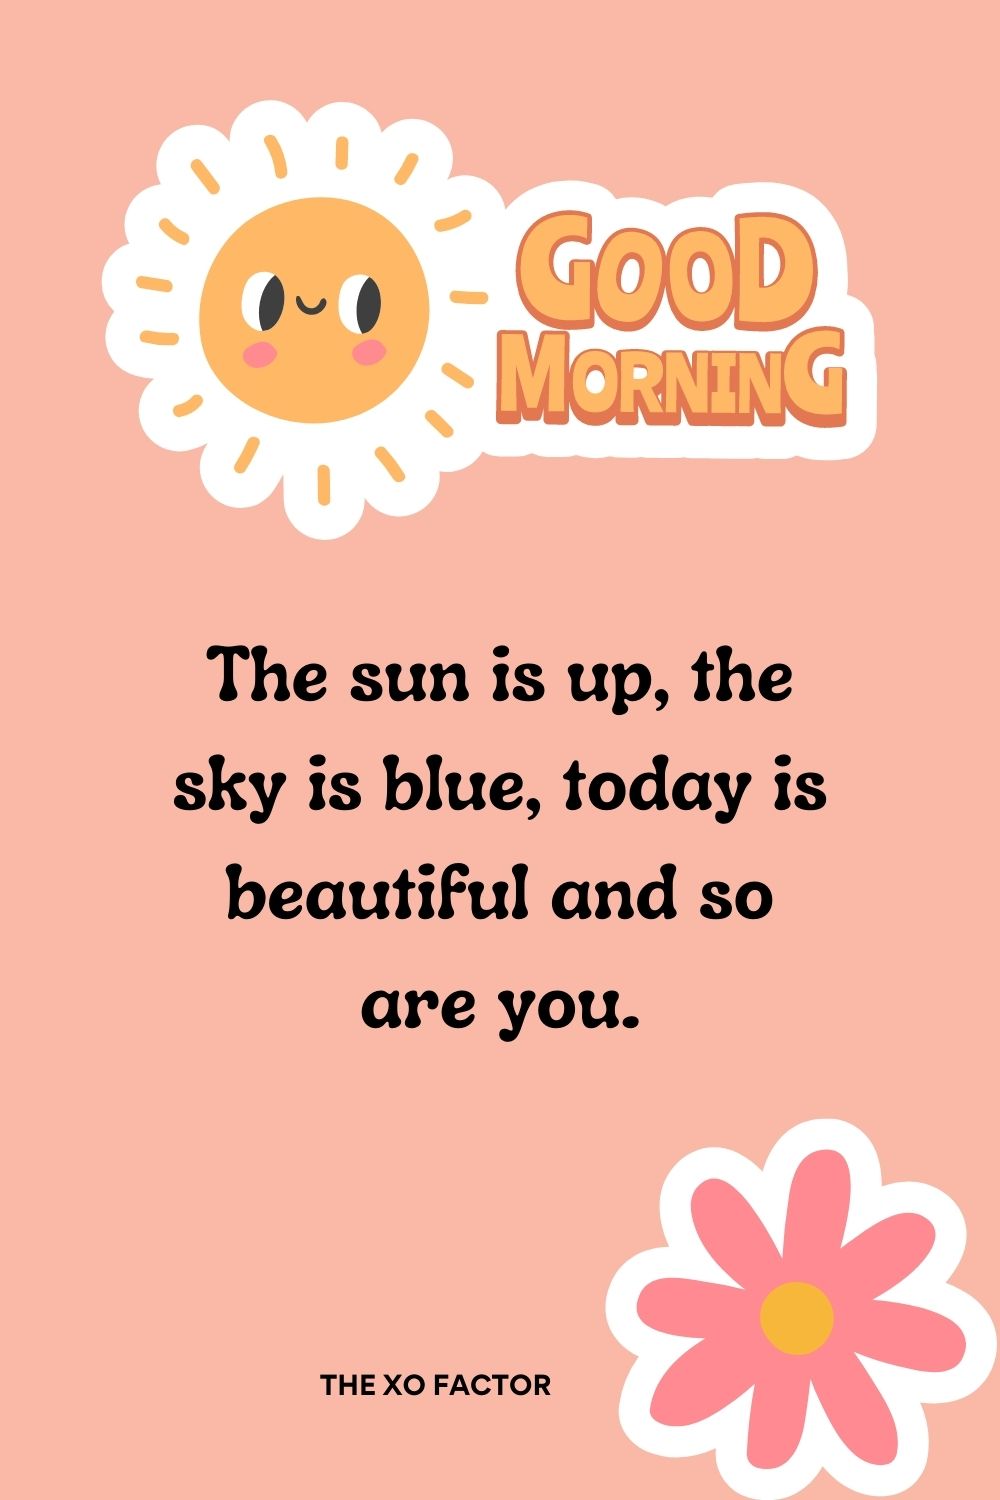 The sun is up, the sky is blue, today is beautiful and so are you.